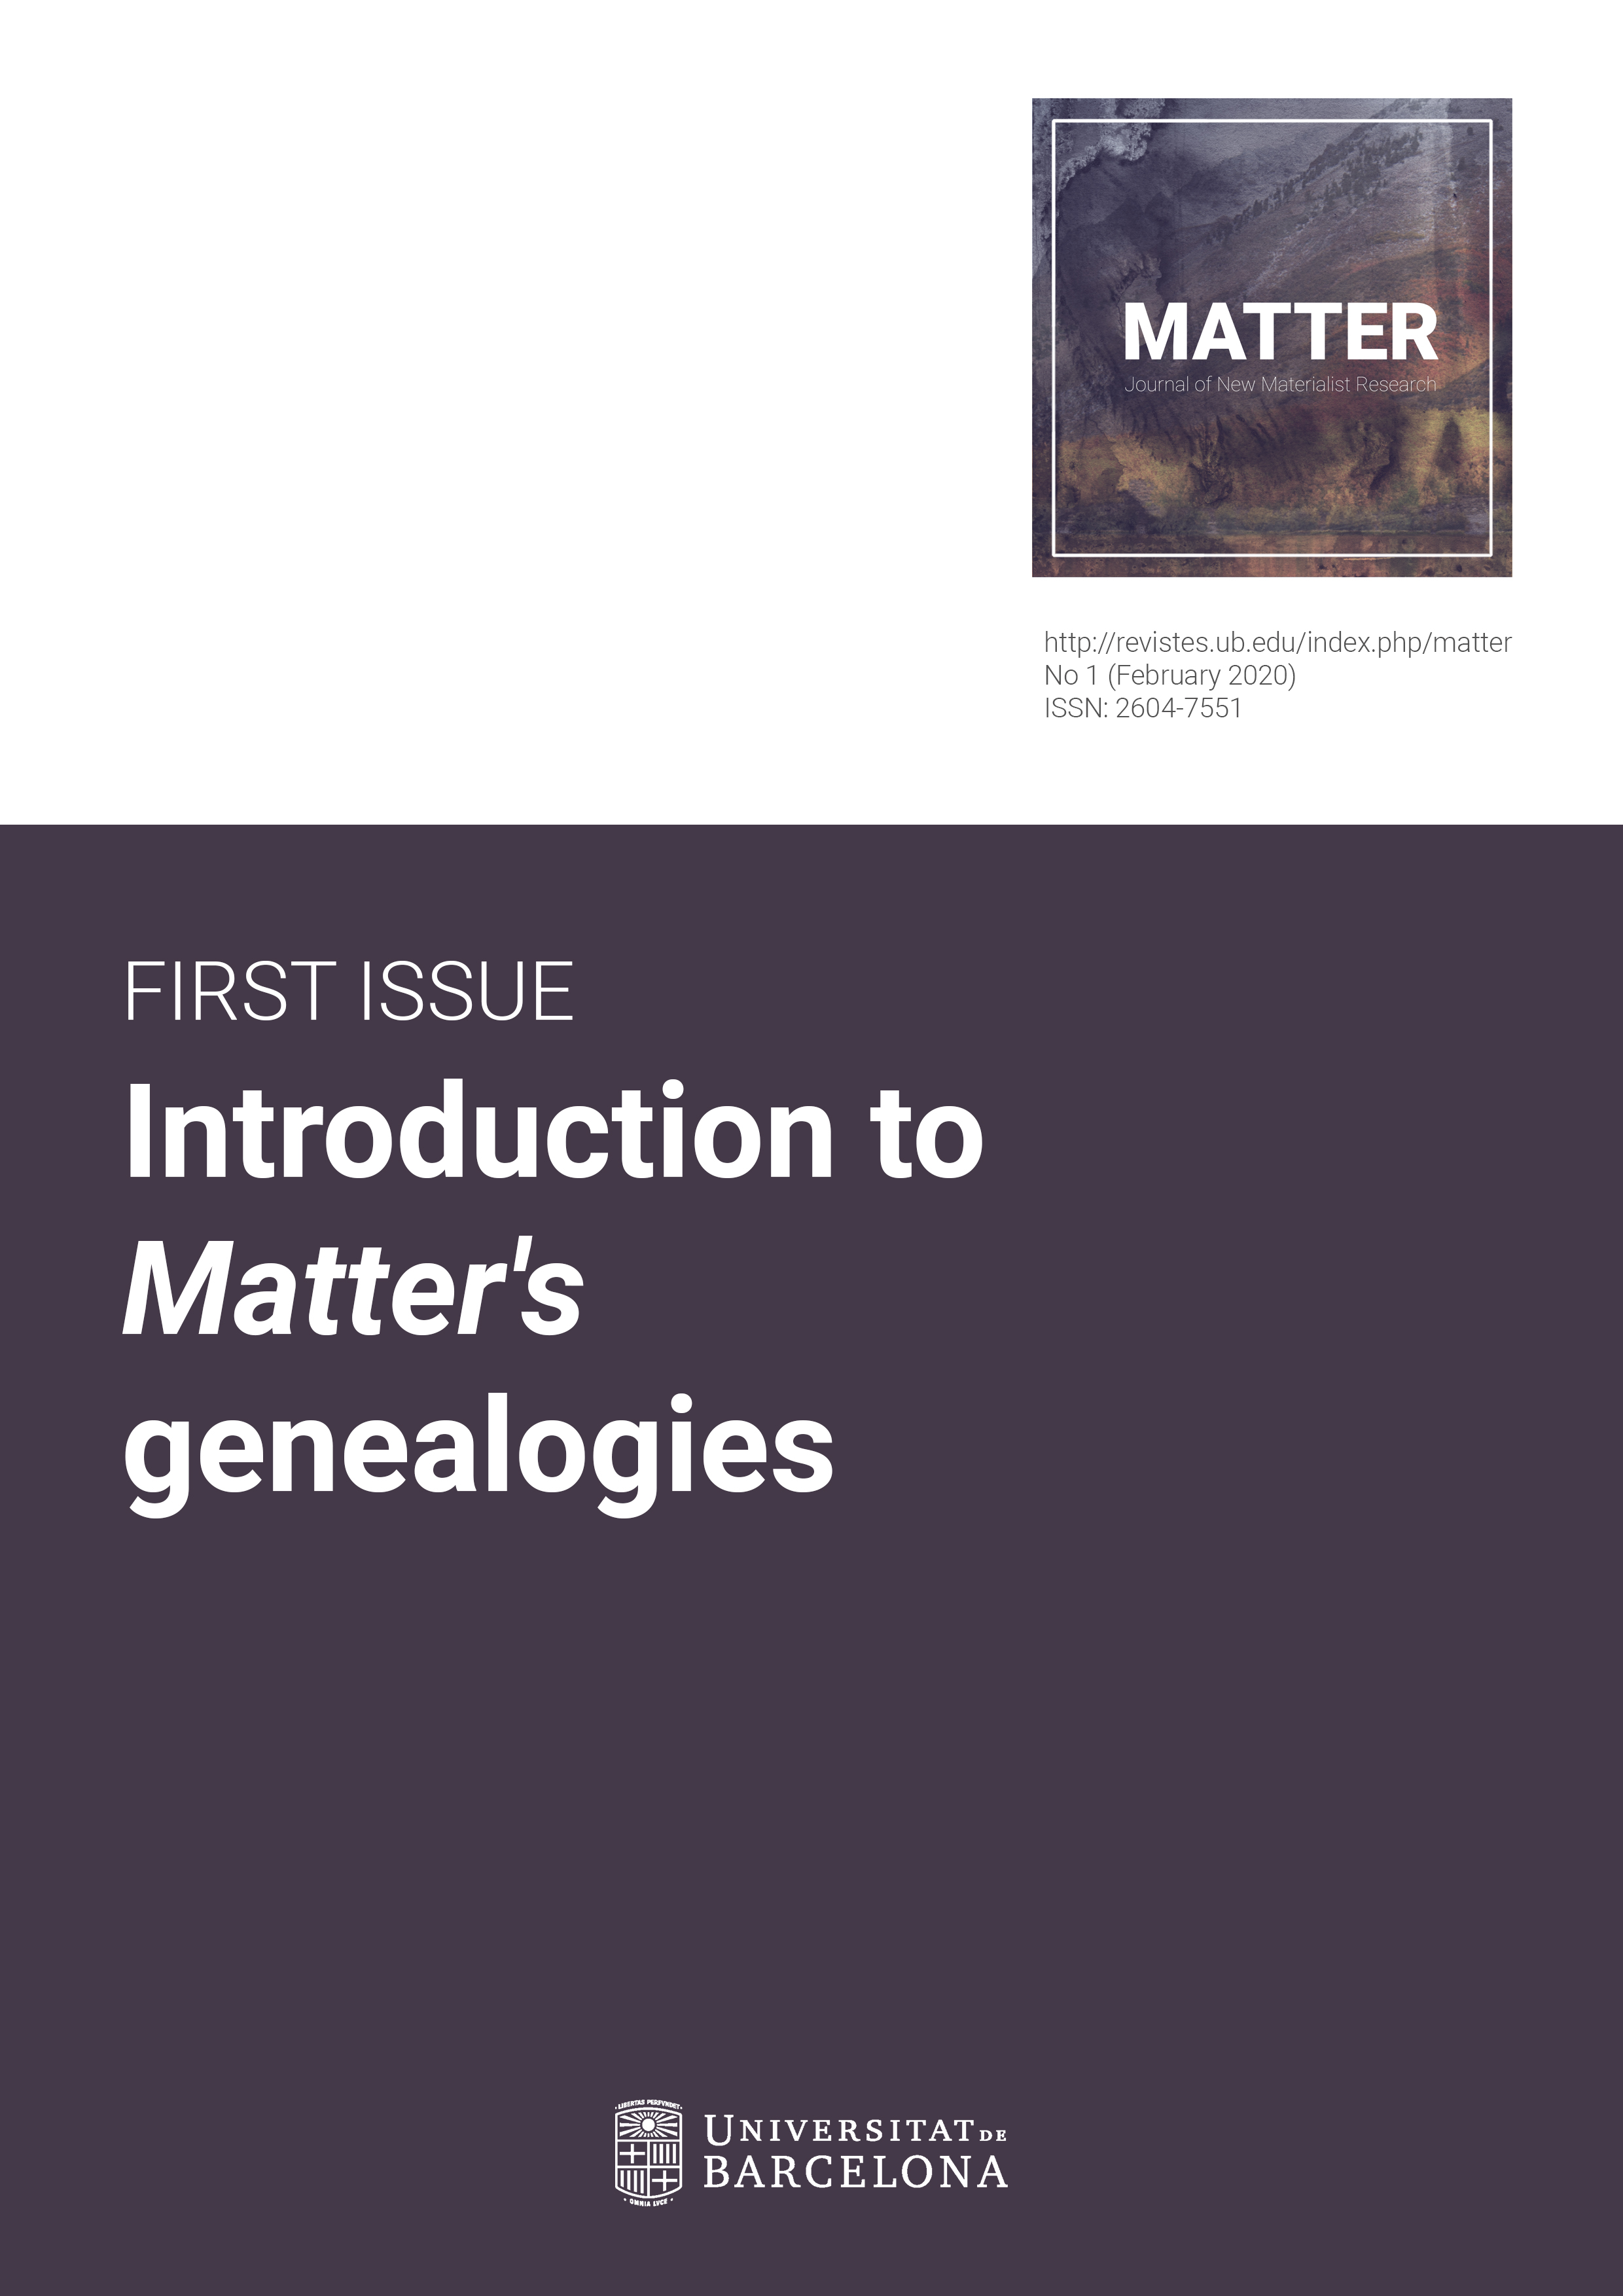 					View Vol. 1 (2020): Introduction to Matter's genealogies
				